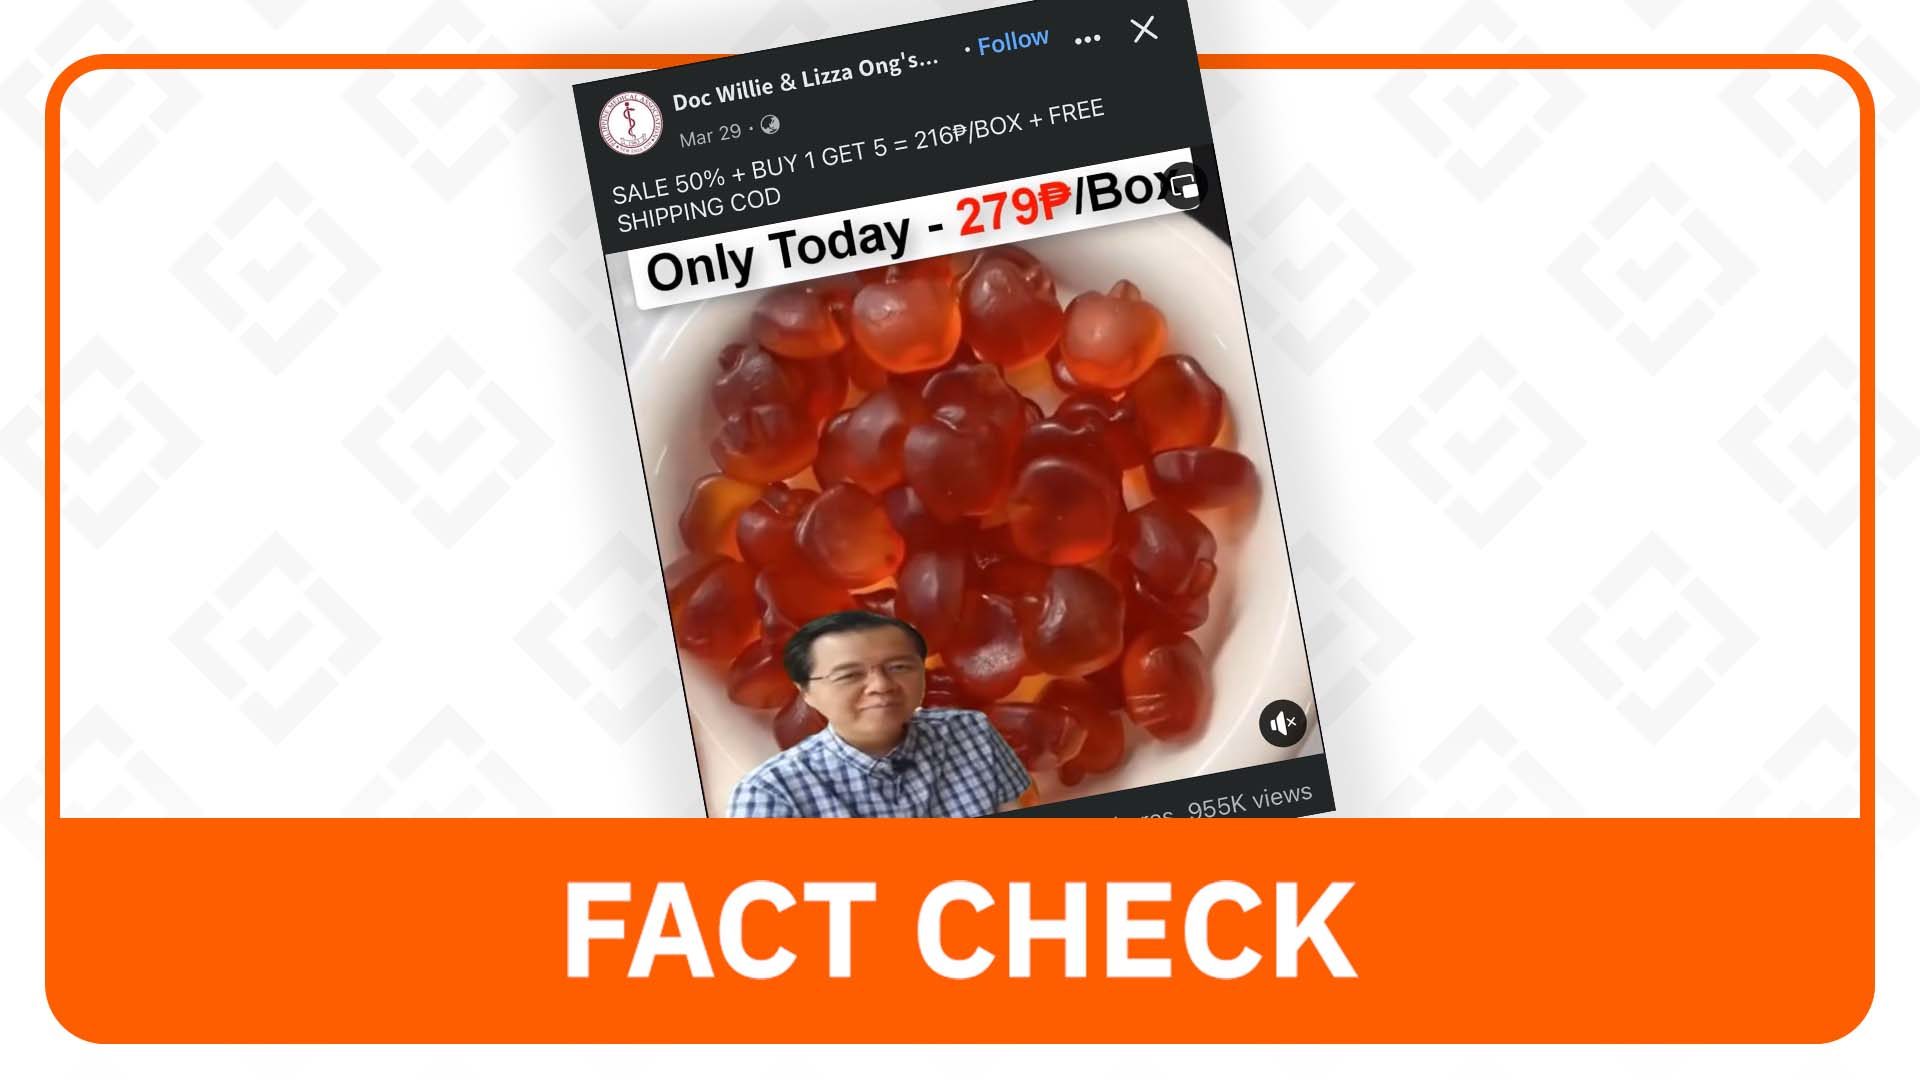 FACT CHECK: Envy Apple Cider Vinegar Gummies not endorsed by Doc Willie Ong